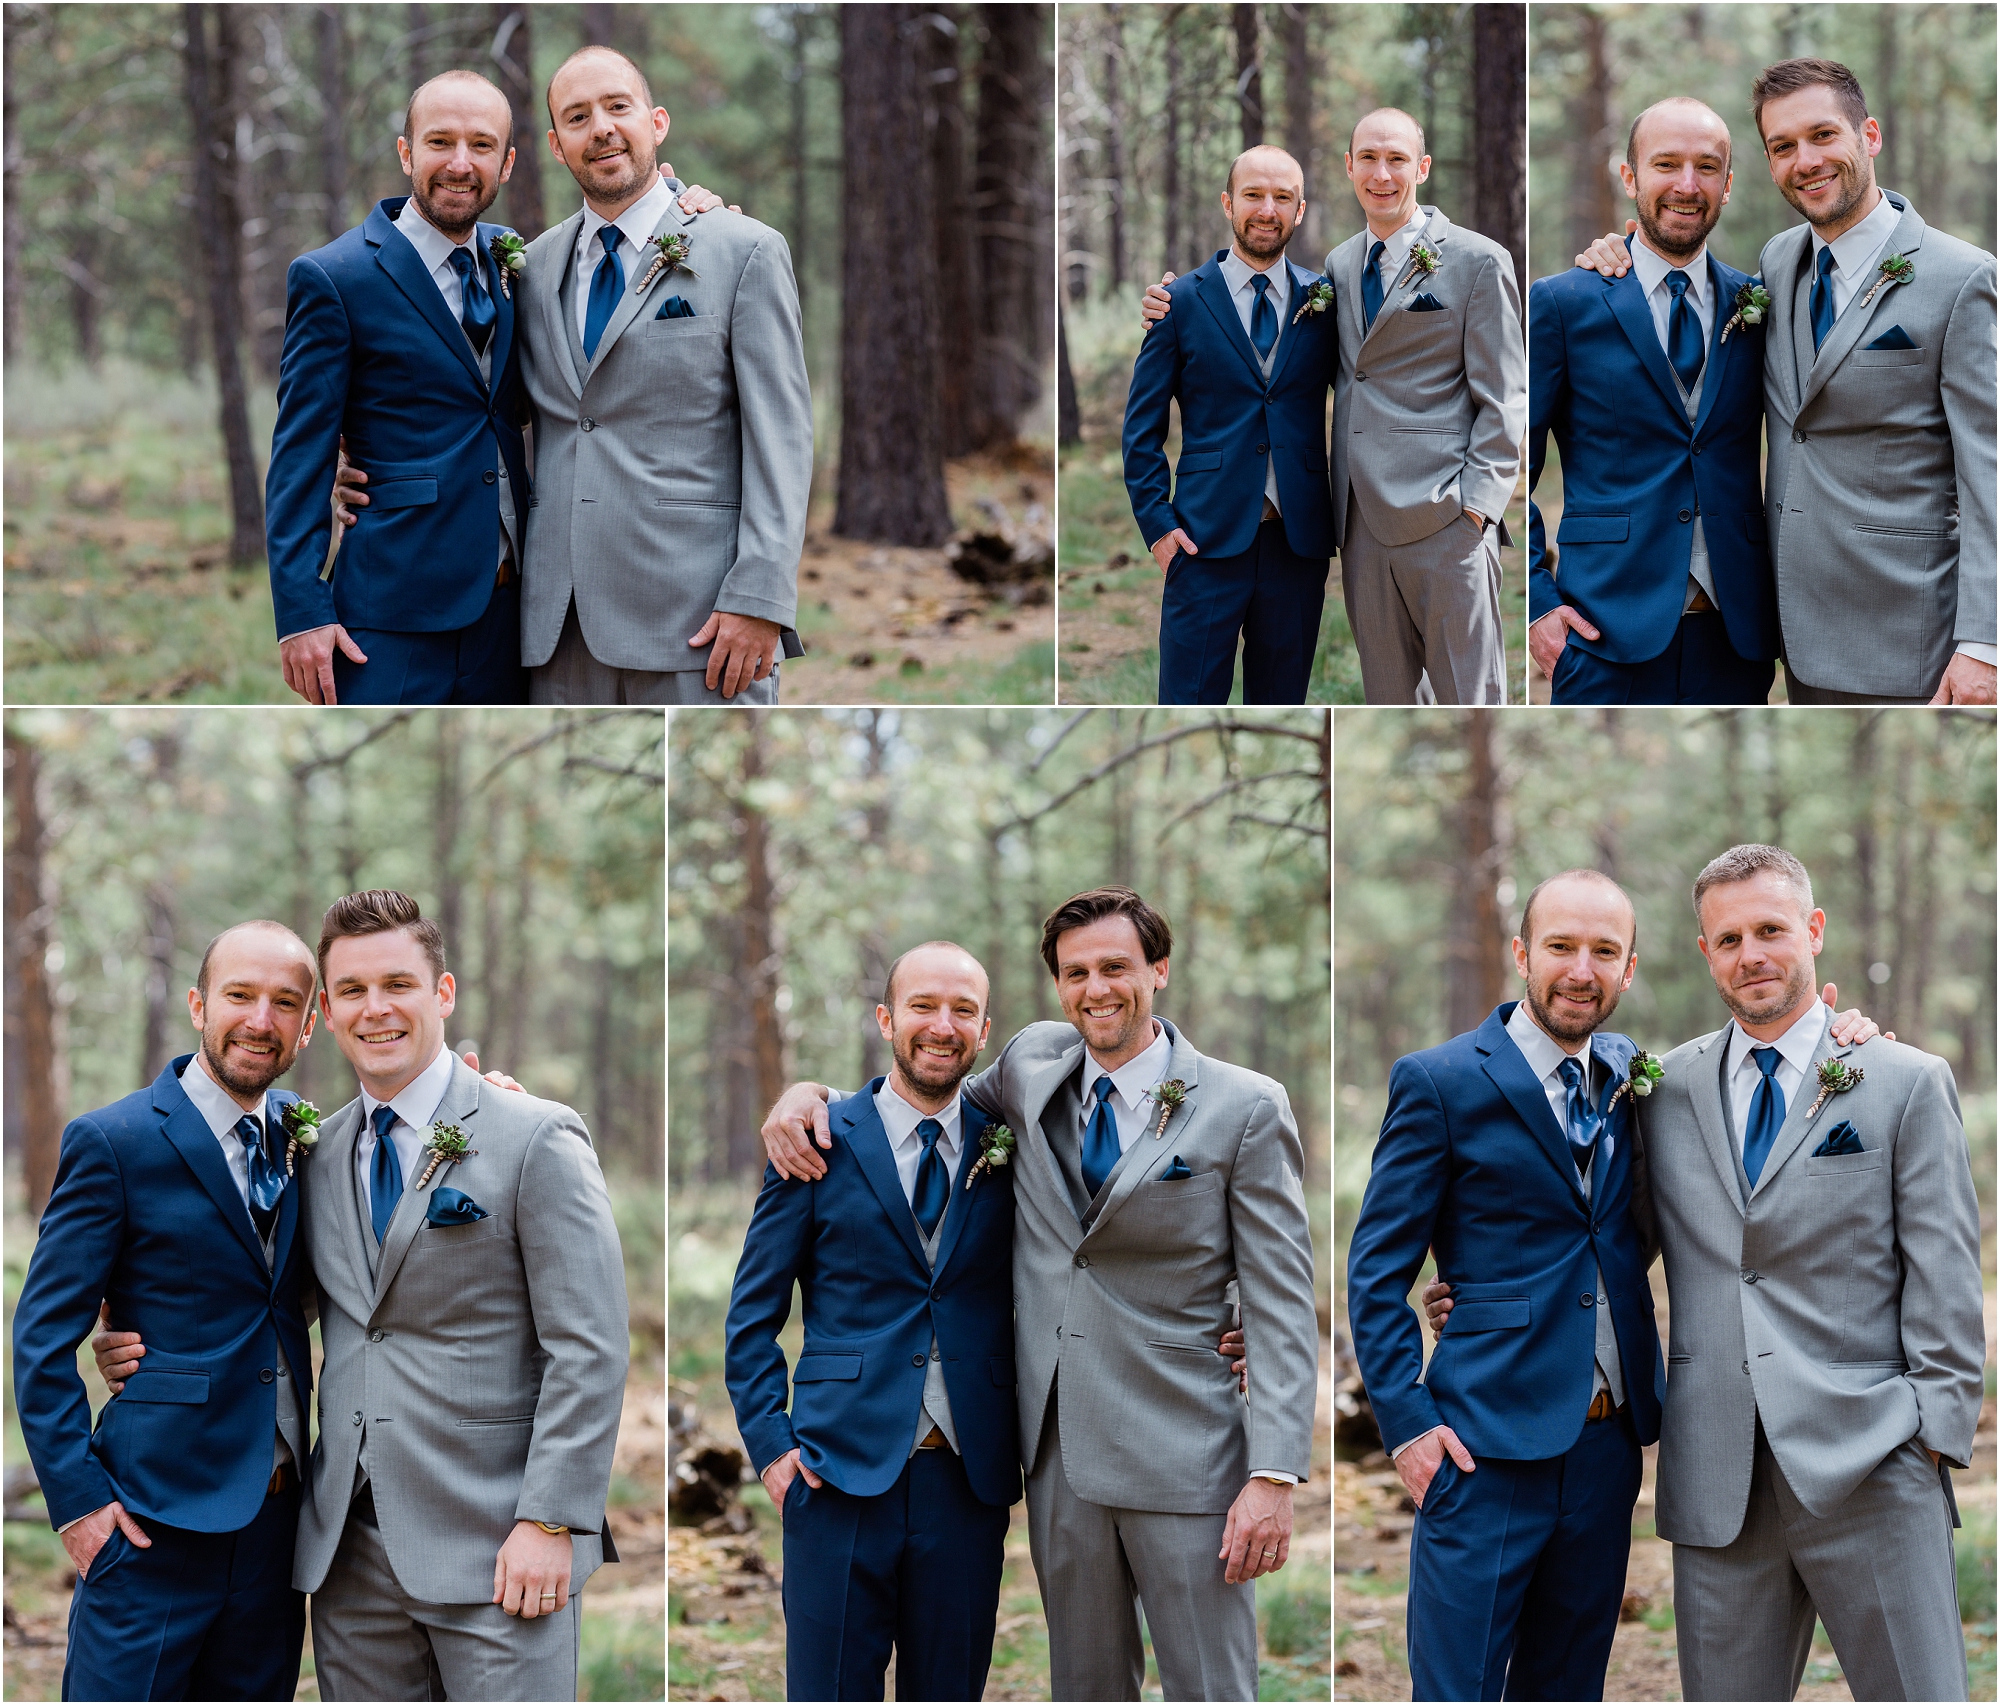 The groom wears a cobalt blue suit and his groomsmen are all in grey with blue ties. | Erica Swantek Photography